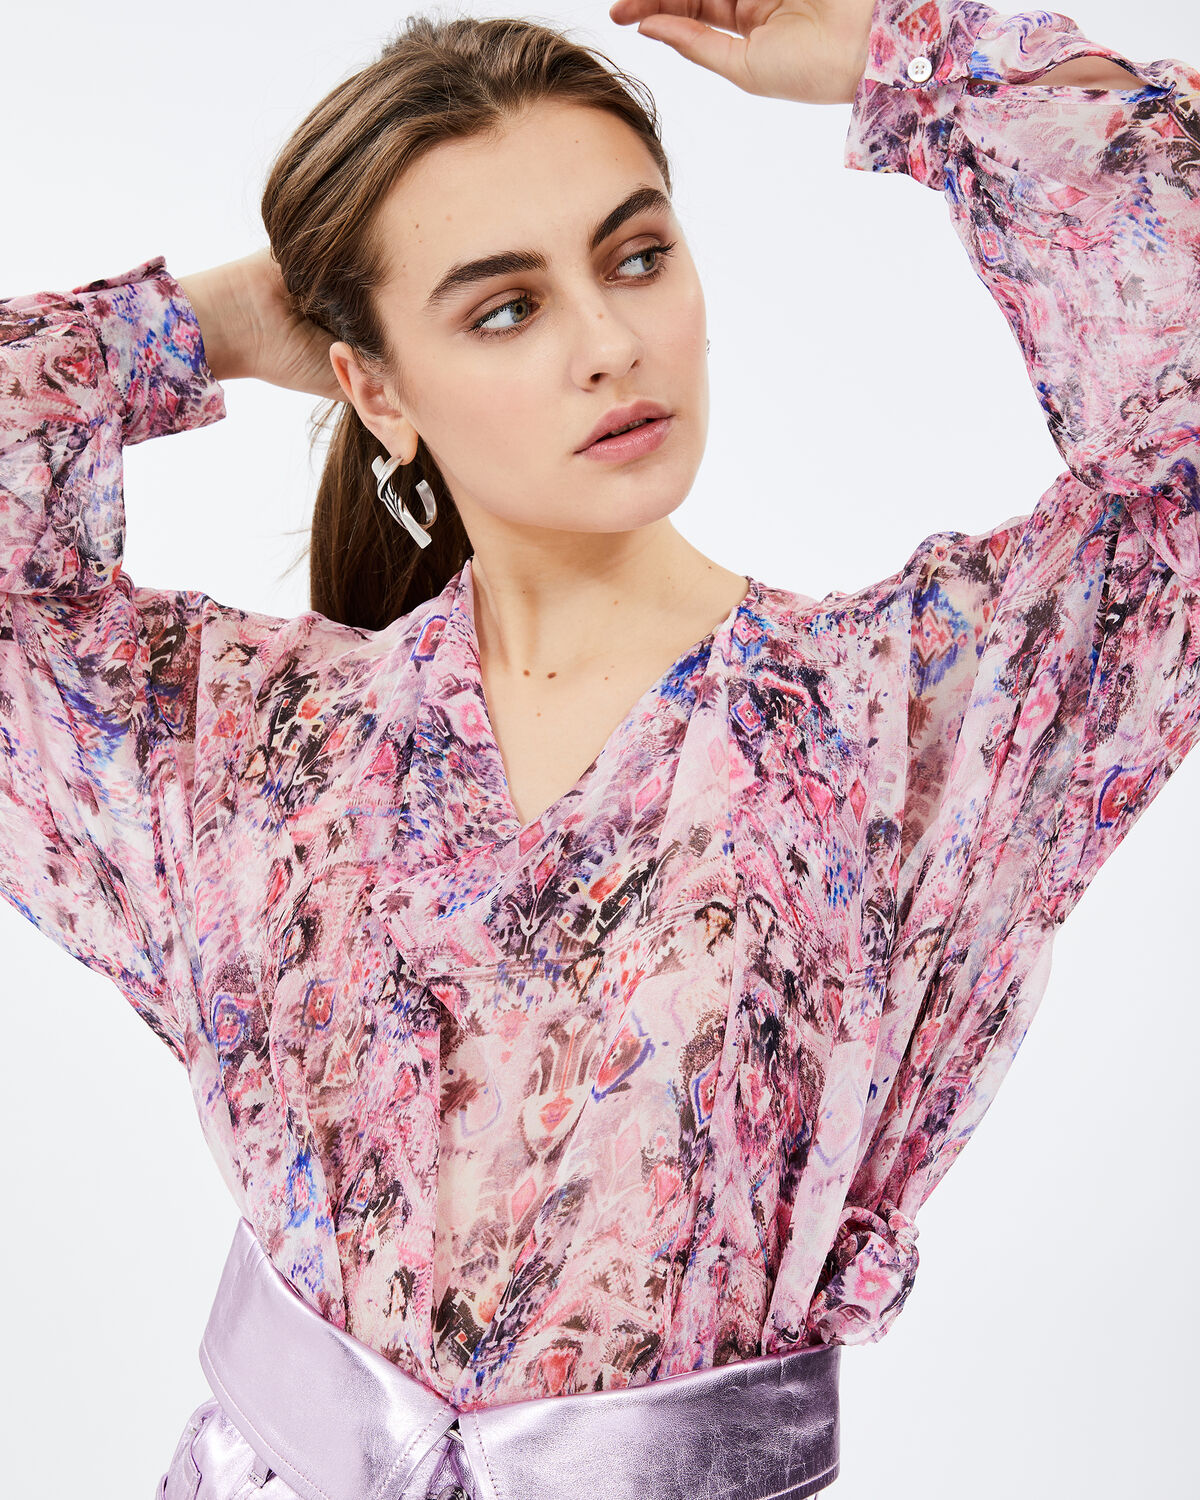 Photo of IRO Paris Ipomea Top Pink - Fluid And Airy, This Silk Top With A Summer Print Will Bring Your Summer Outfits To Life. With Its Puffed Sleeves And Multiple Flounces And Pleats, It Will Be The Ideal Piece To Bring A Touch Of Refinement And Colour To Your Wardrobe. Spring Summer 19